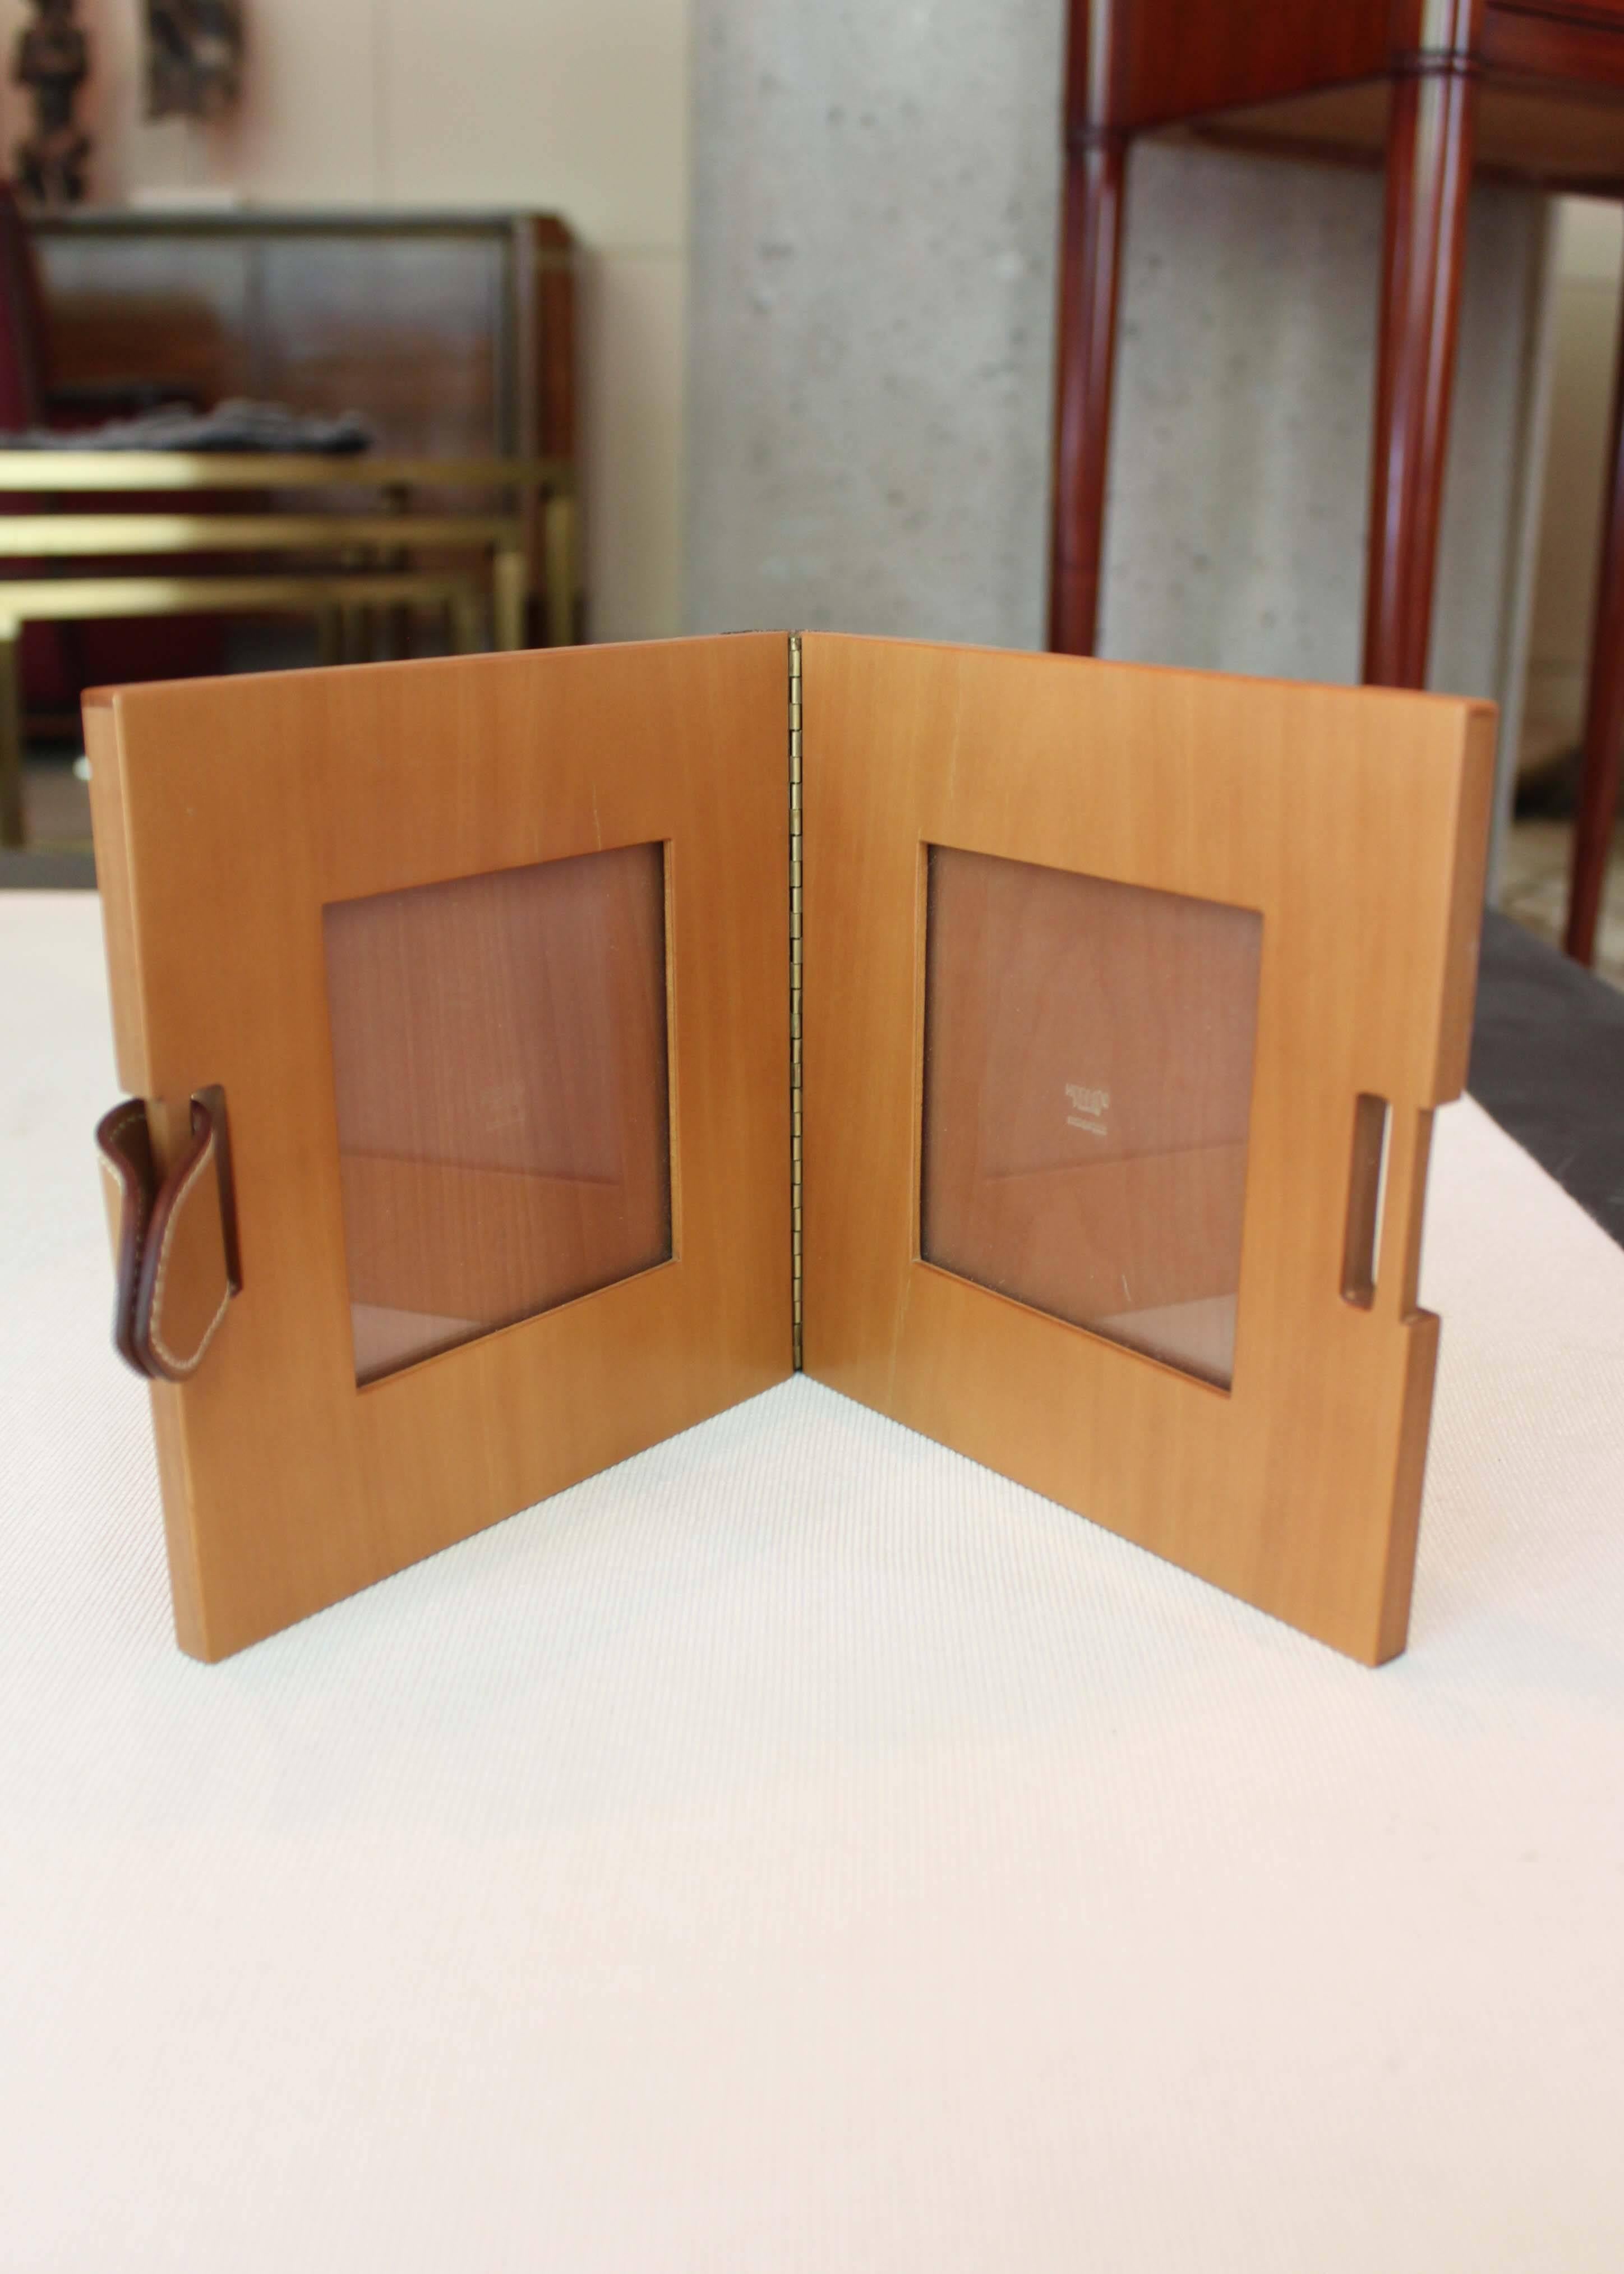 Vintage Hermès fruitwood and leather folding picture frame. Great desk accessory or as a bed-side frame.